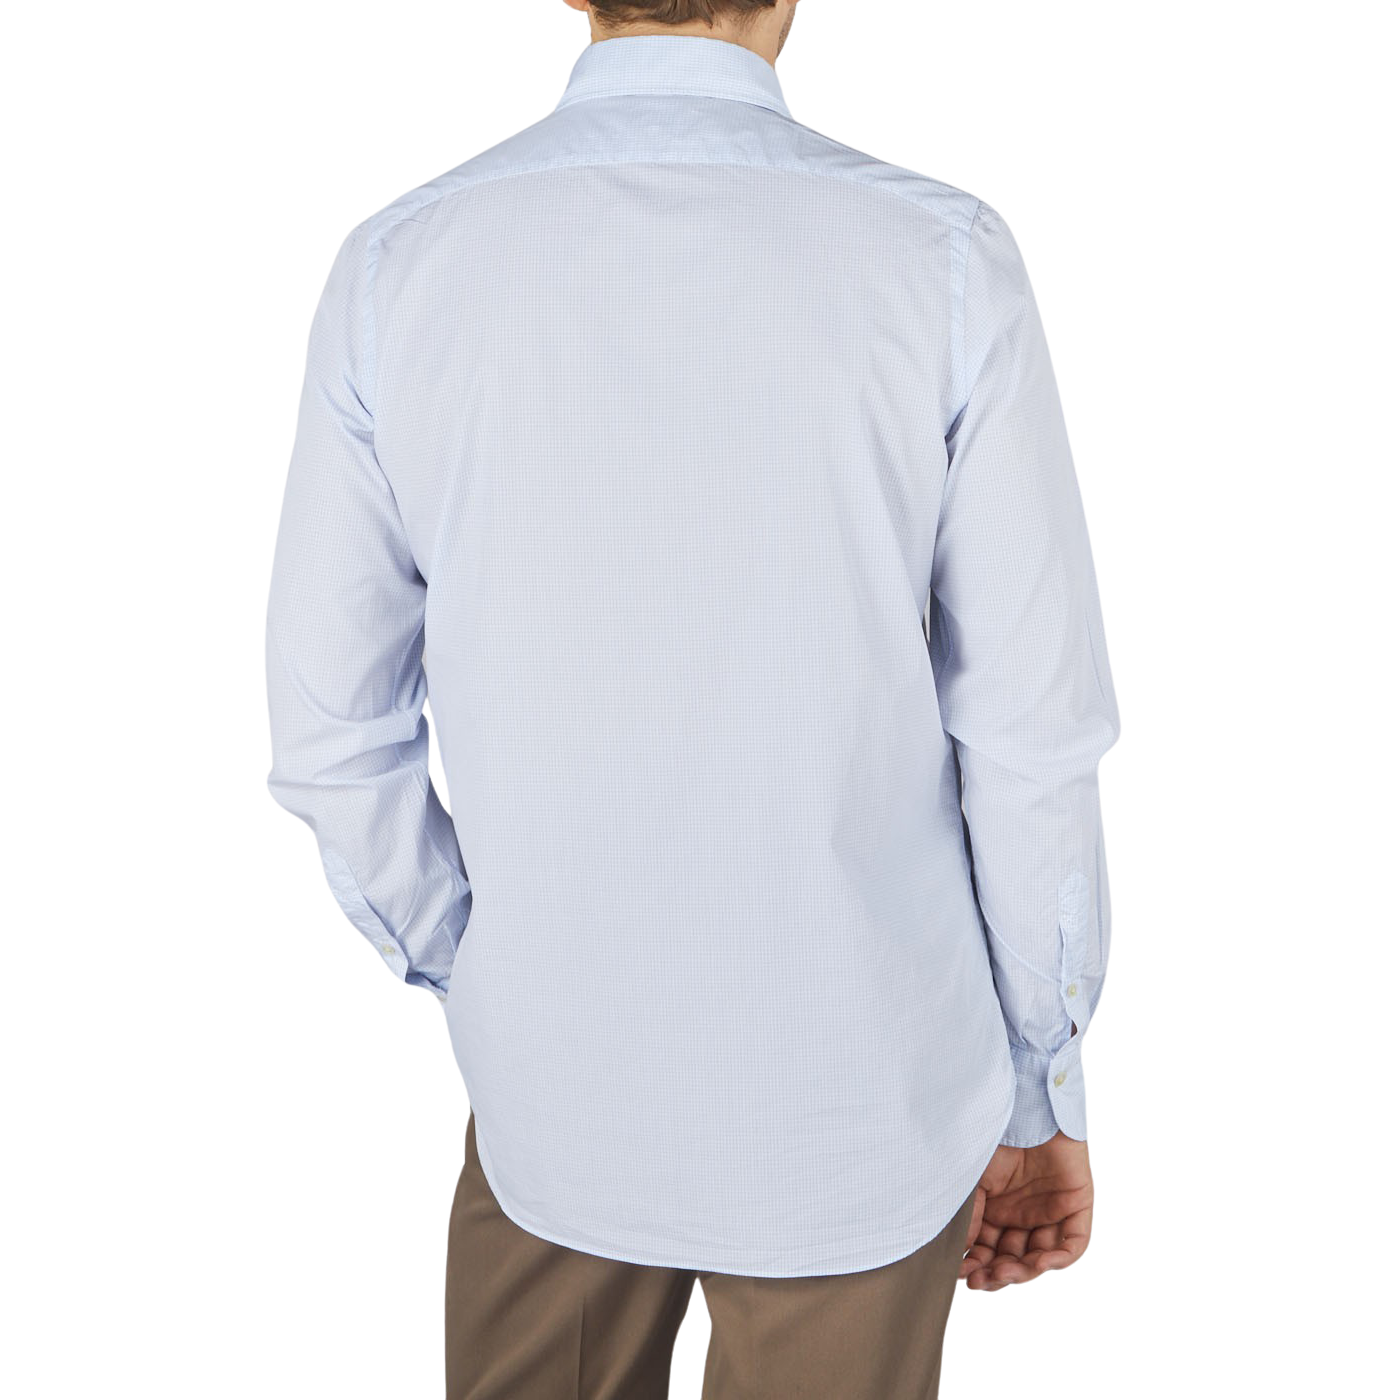 The back view of a man wearing a Finamore Light Blue Cotton Small Check BD Shirt.